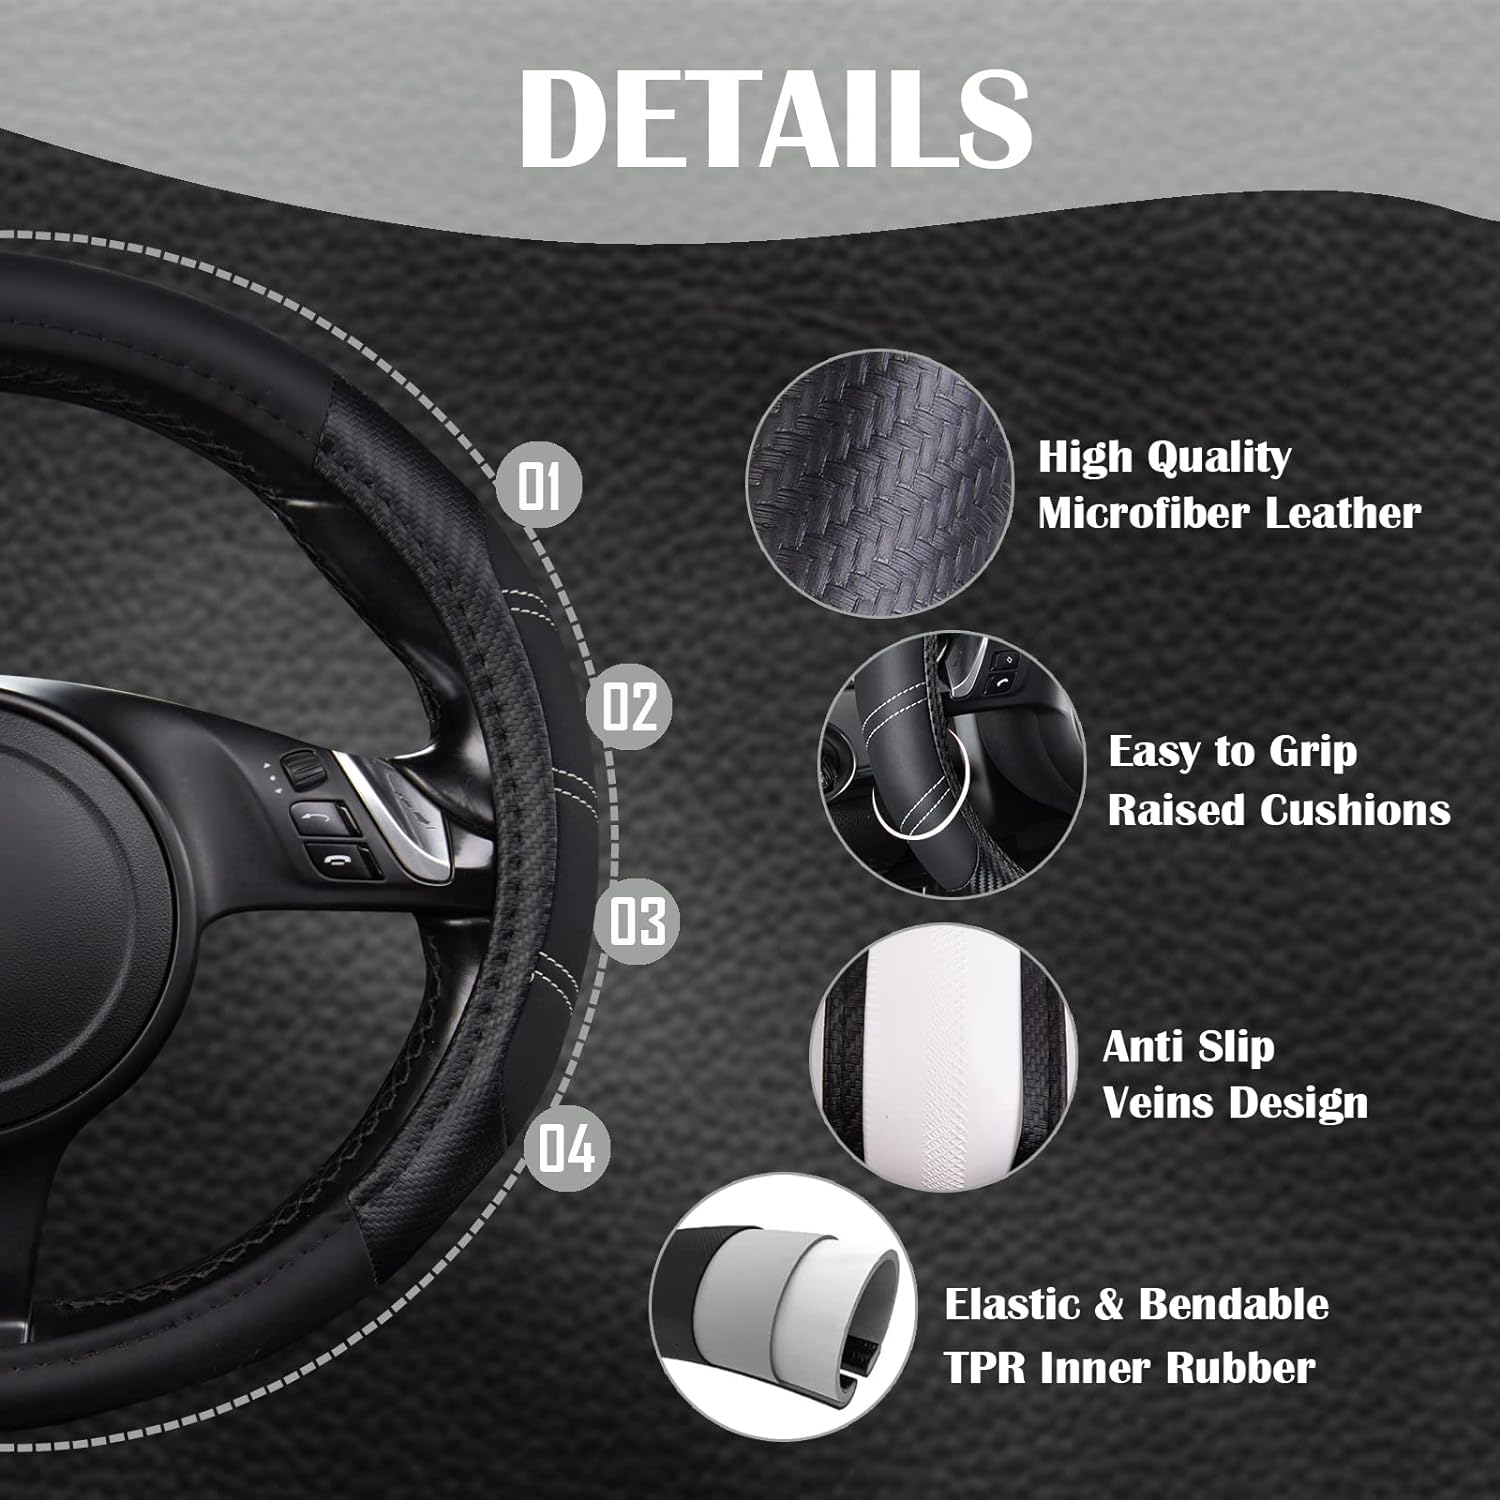 CAR PASS Steering Wheel Cover and Heavy Duty Leather Seat Cover Combo, Waterproof Automotive Seat Cover Fit for Most Sedans, SUV, Pick-Up, Truck.Carbon Fiber Black.